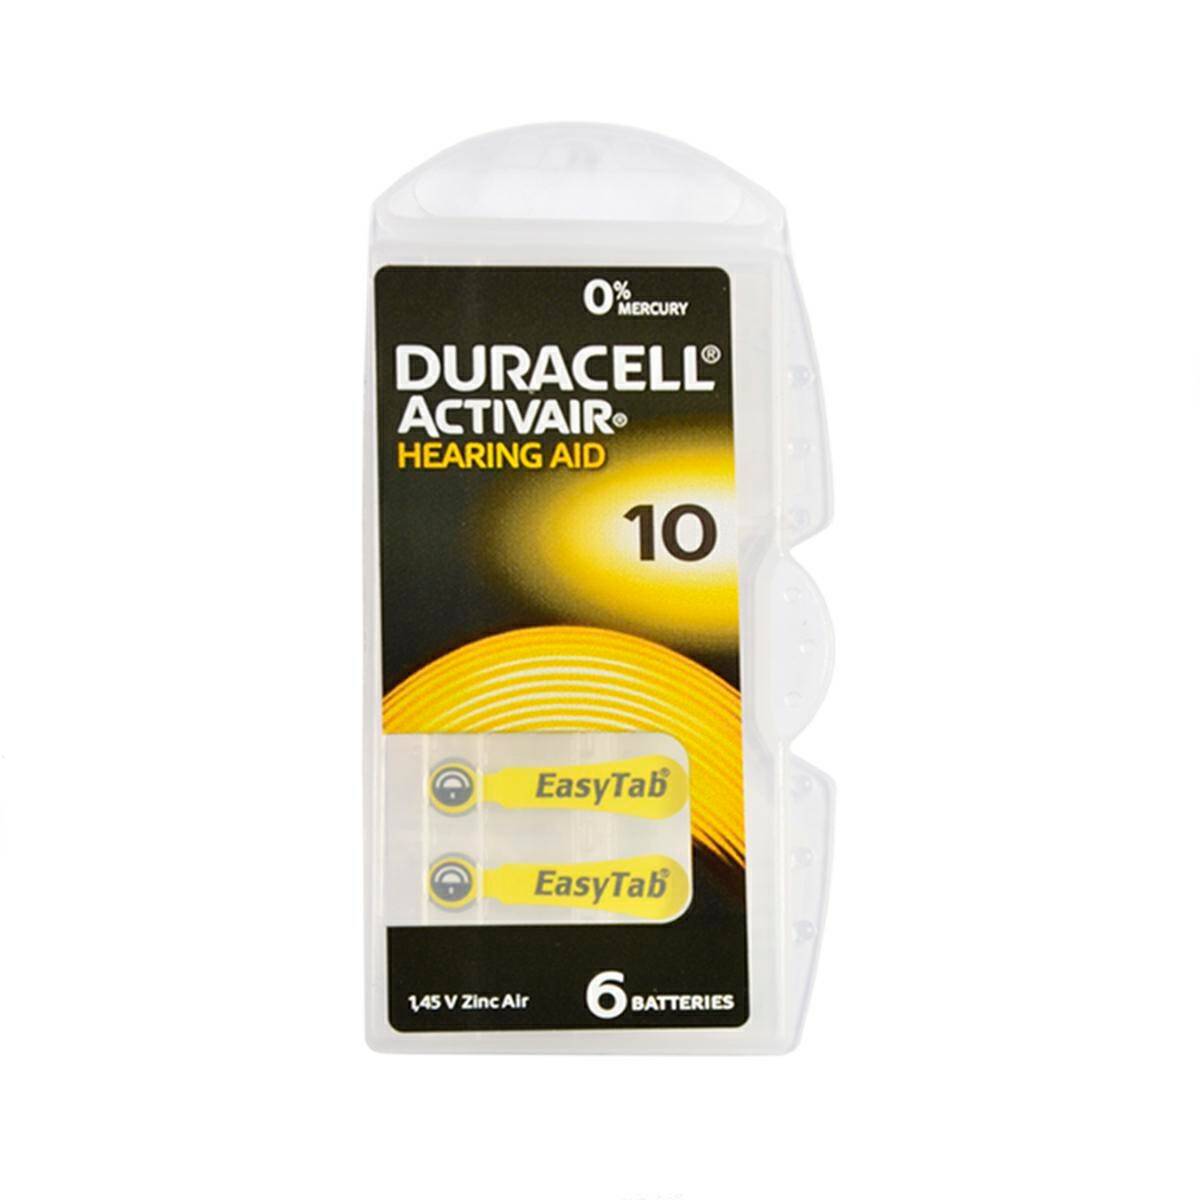 Batterie Duracell Hearing AID 10 1,45V